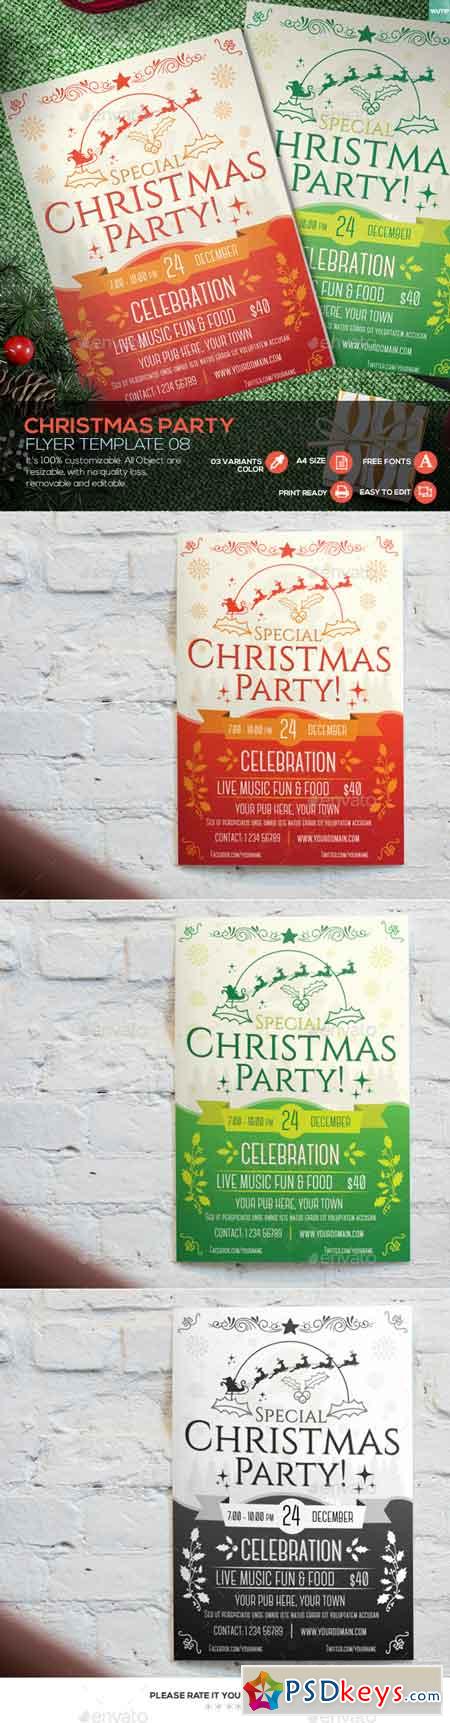 Christmas Party - Flyer Template 08 13870300